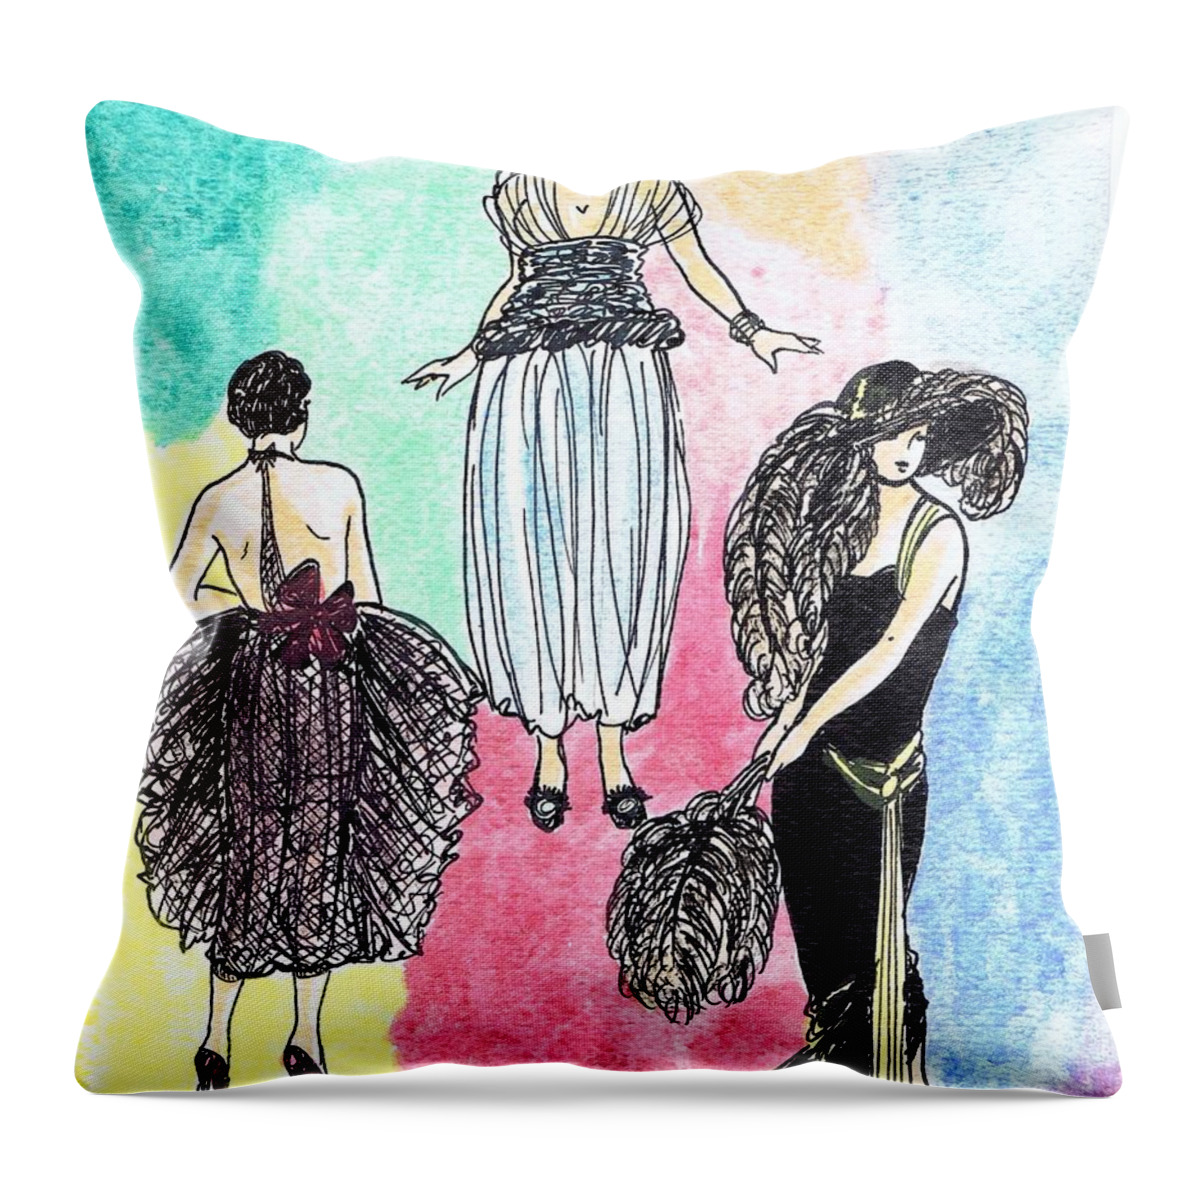 Nostalgia Throw Pillow featuring the drawing 1920s Gals 4 by Mel Thompson